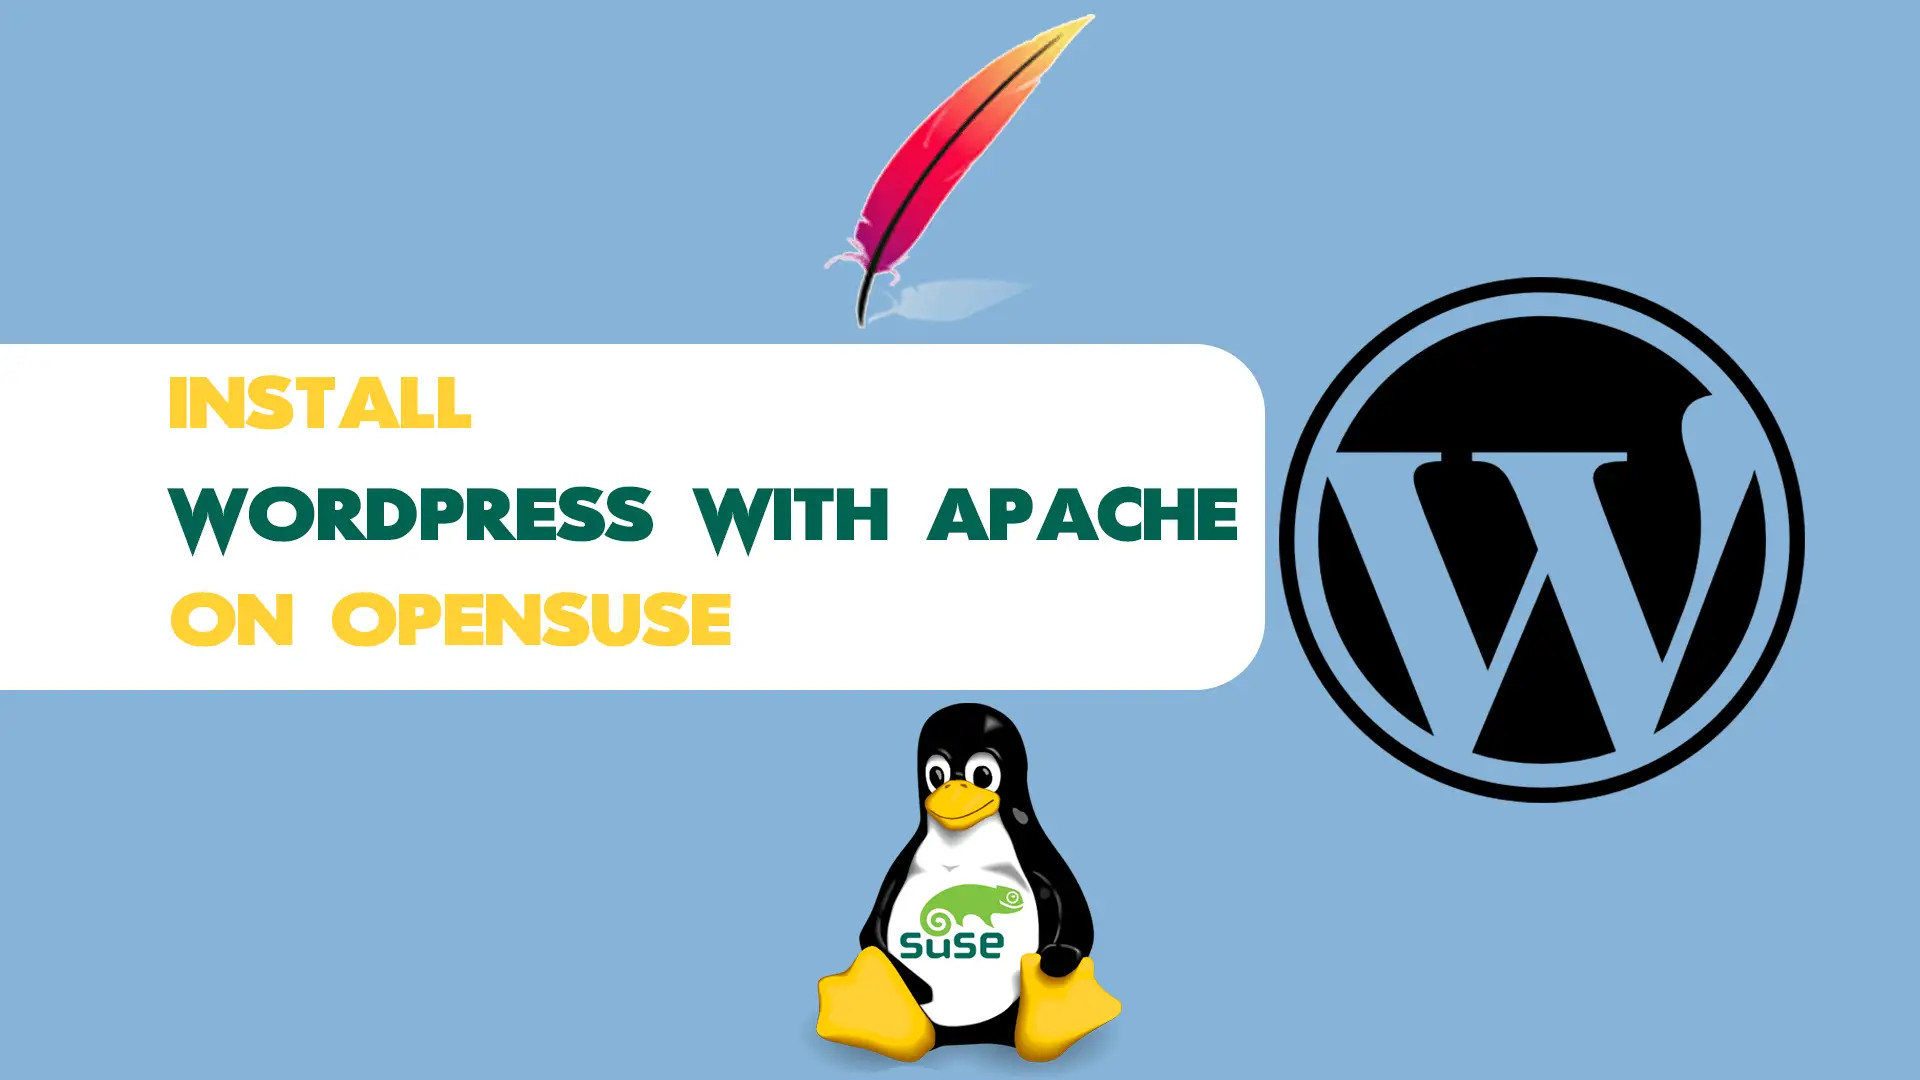 Install WordPress with Apache on OpenSUSE